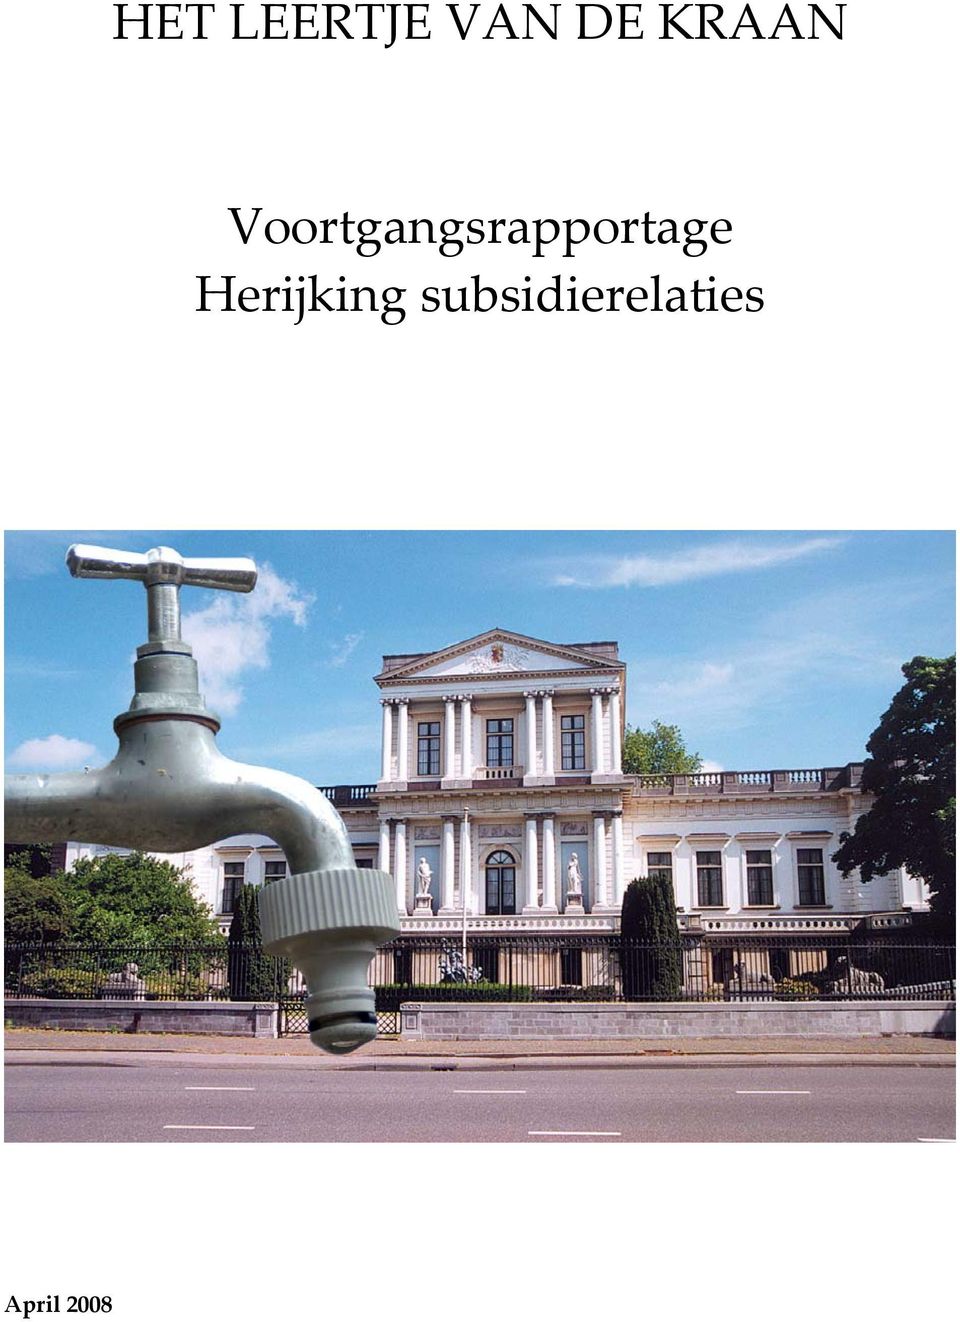 Voortgangsrapportage